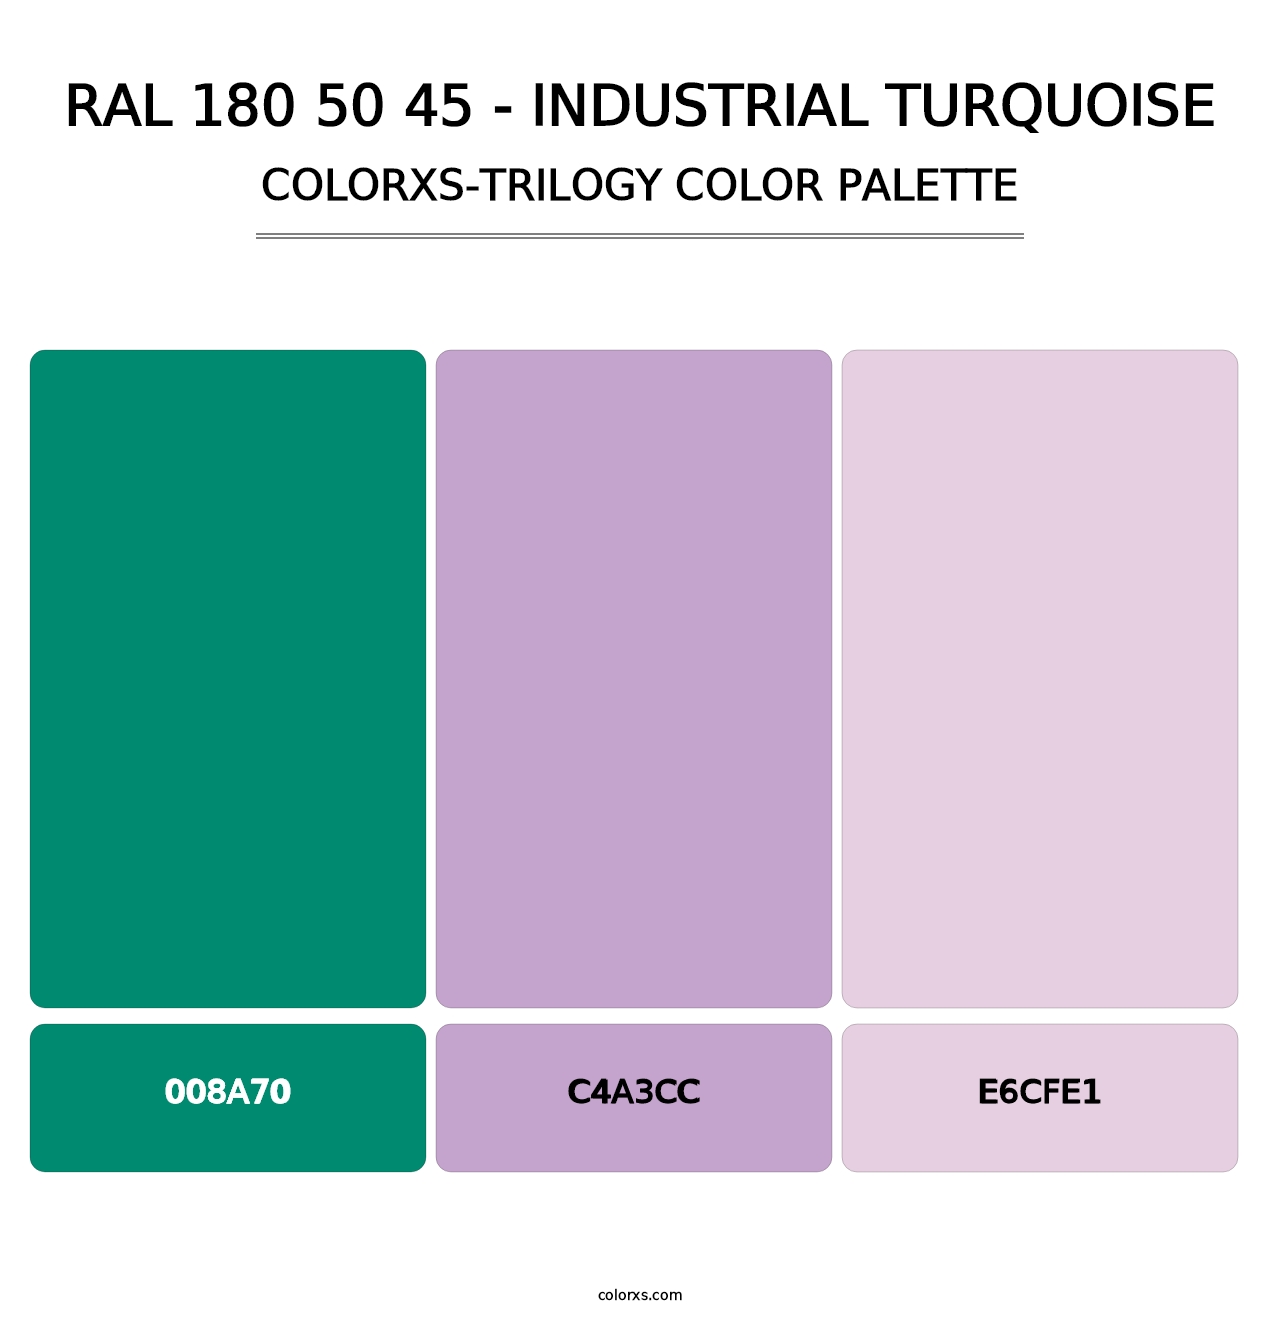 RAL 180 50 45 - Industrial Turquoise - Colorxs Trilogy Palette